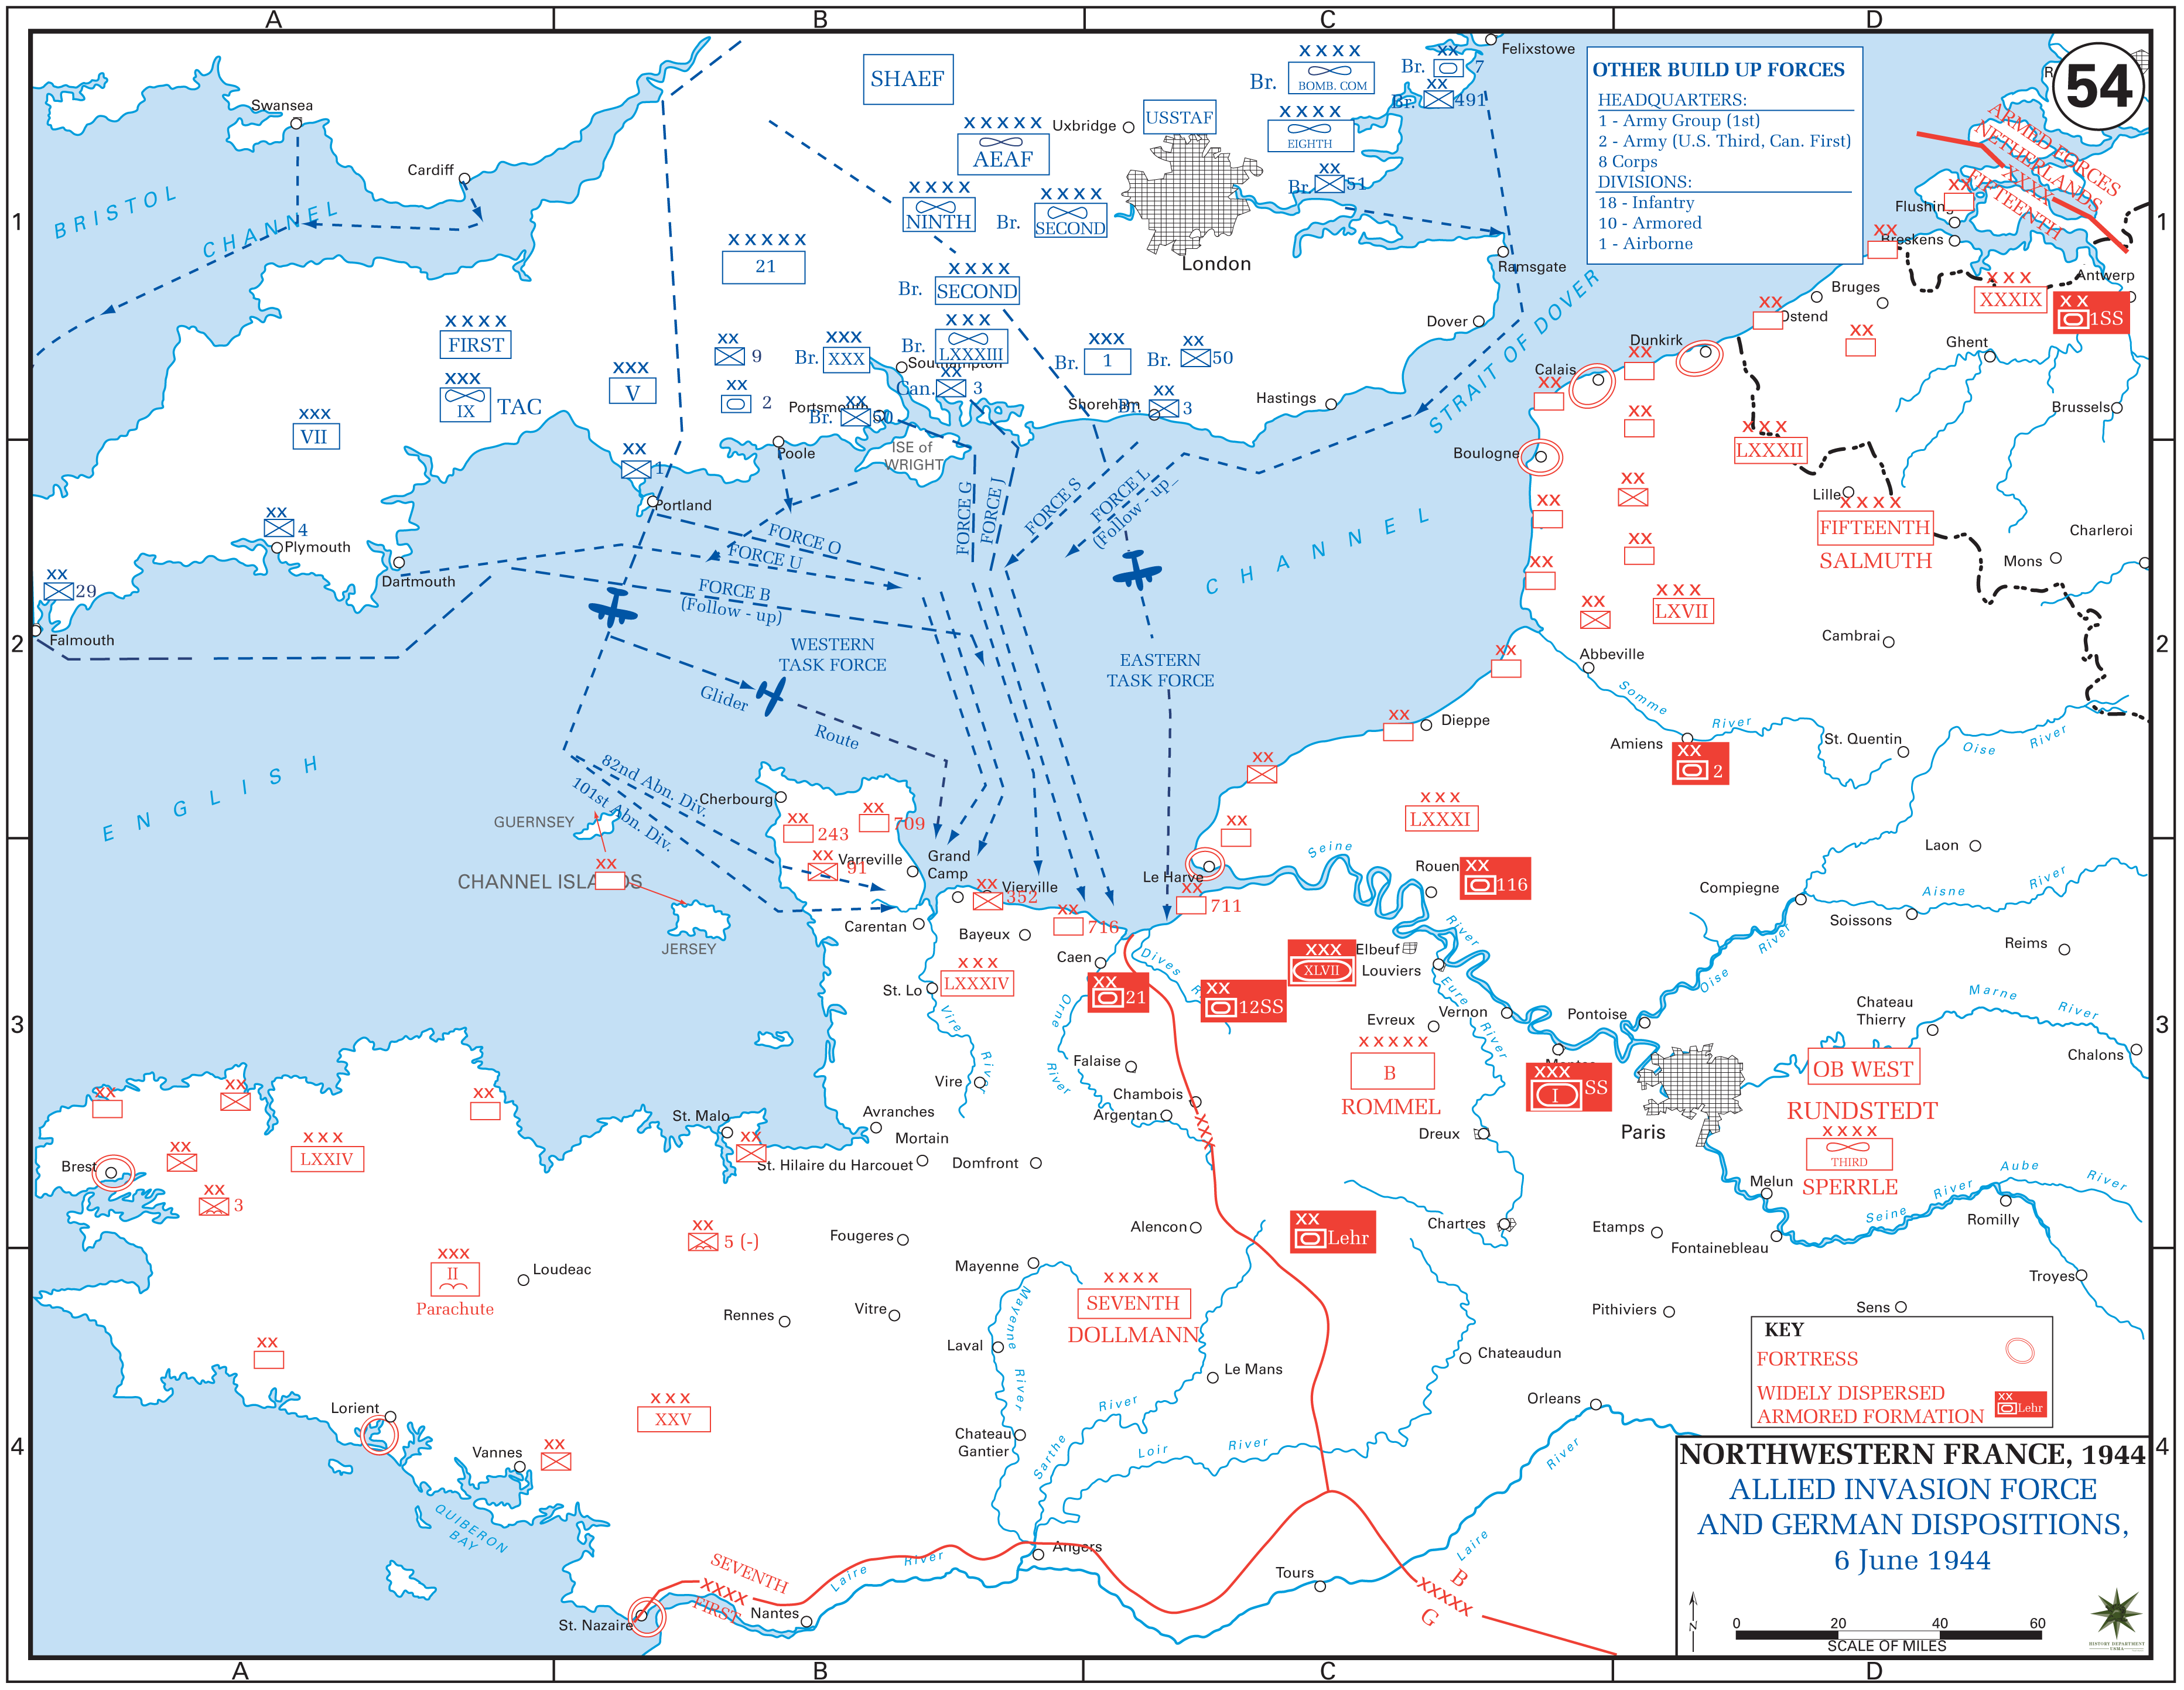 Routes used to cross the English Channel and landing points in Normandy